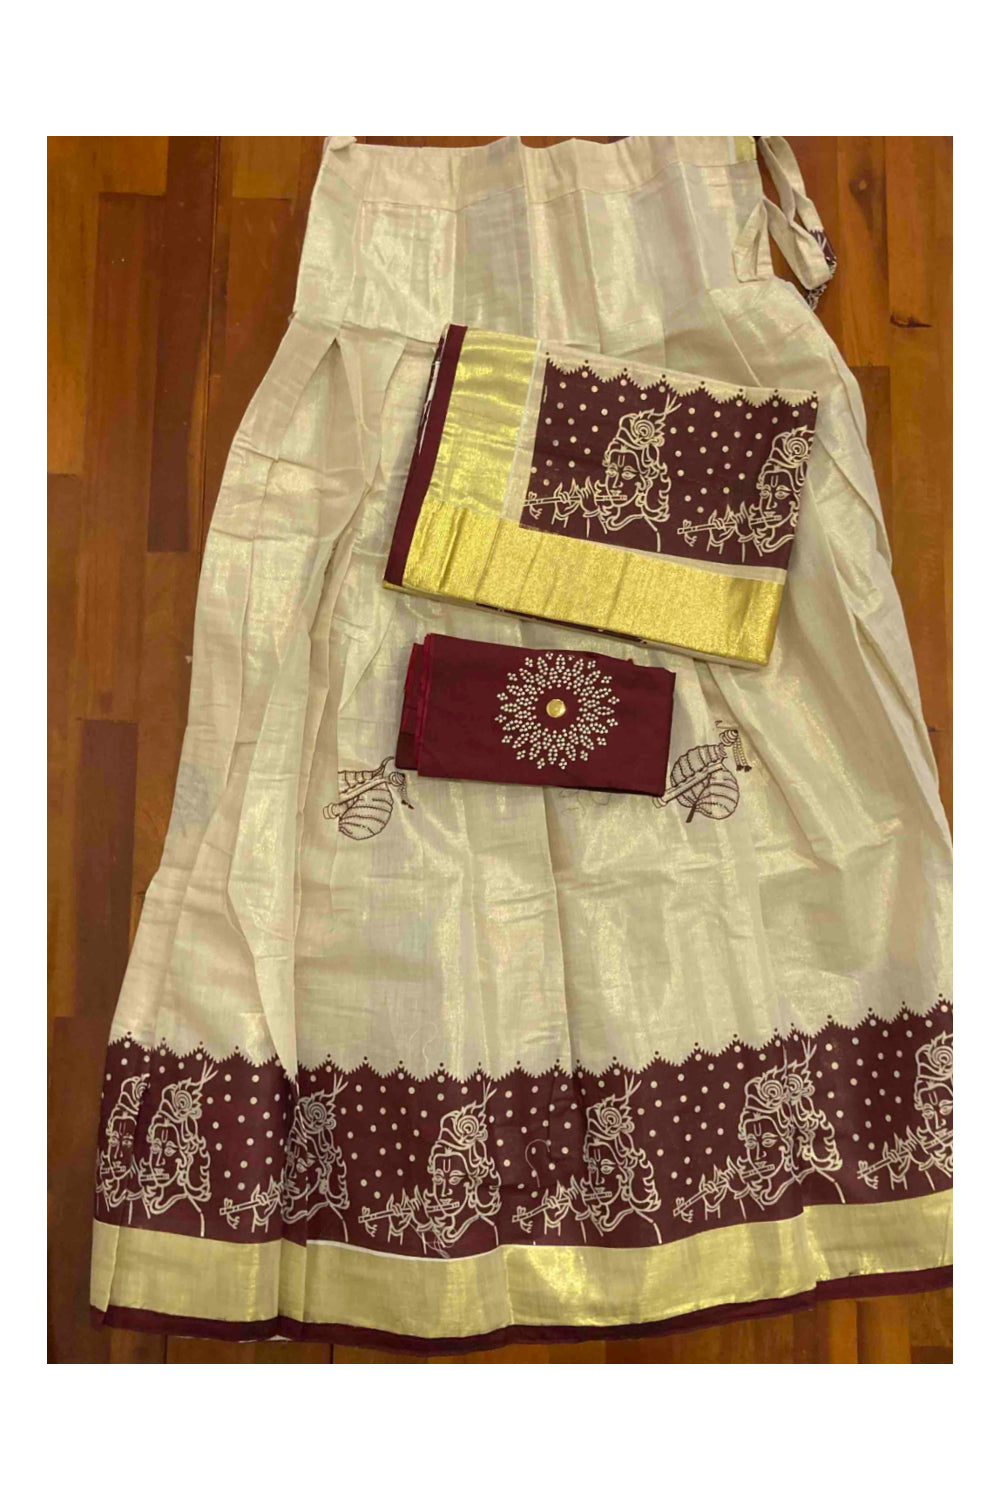 Kerala Tissue Stitched Dhavani Set with Blouse Piece and Neriyathu in with Maroon Accents and Mural Designs